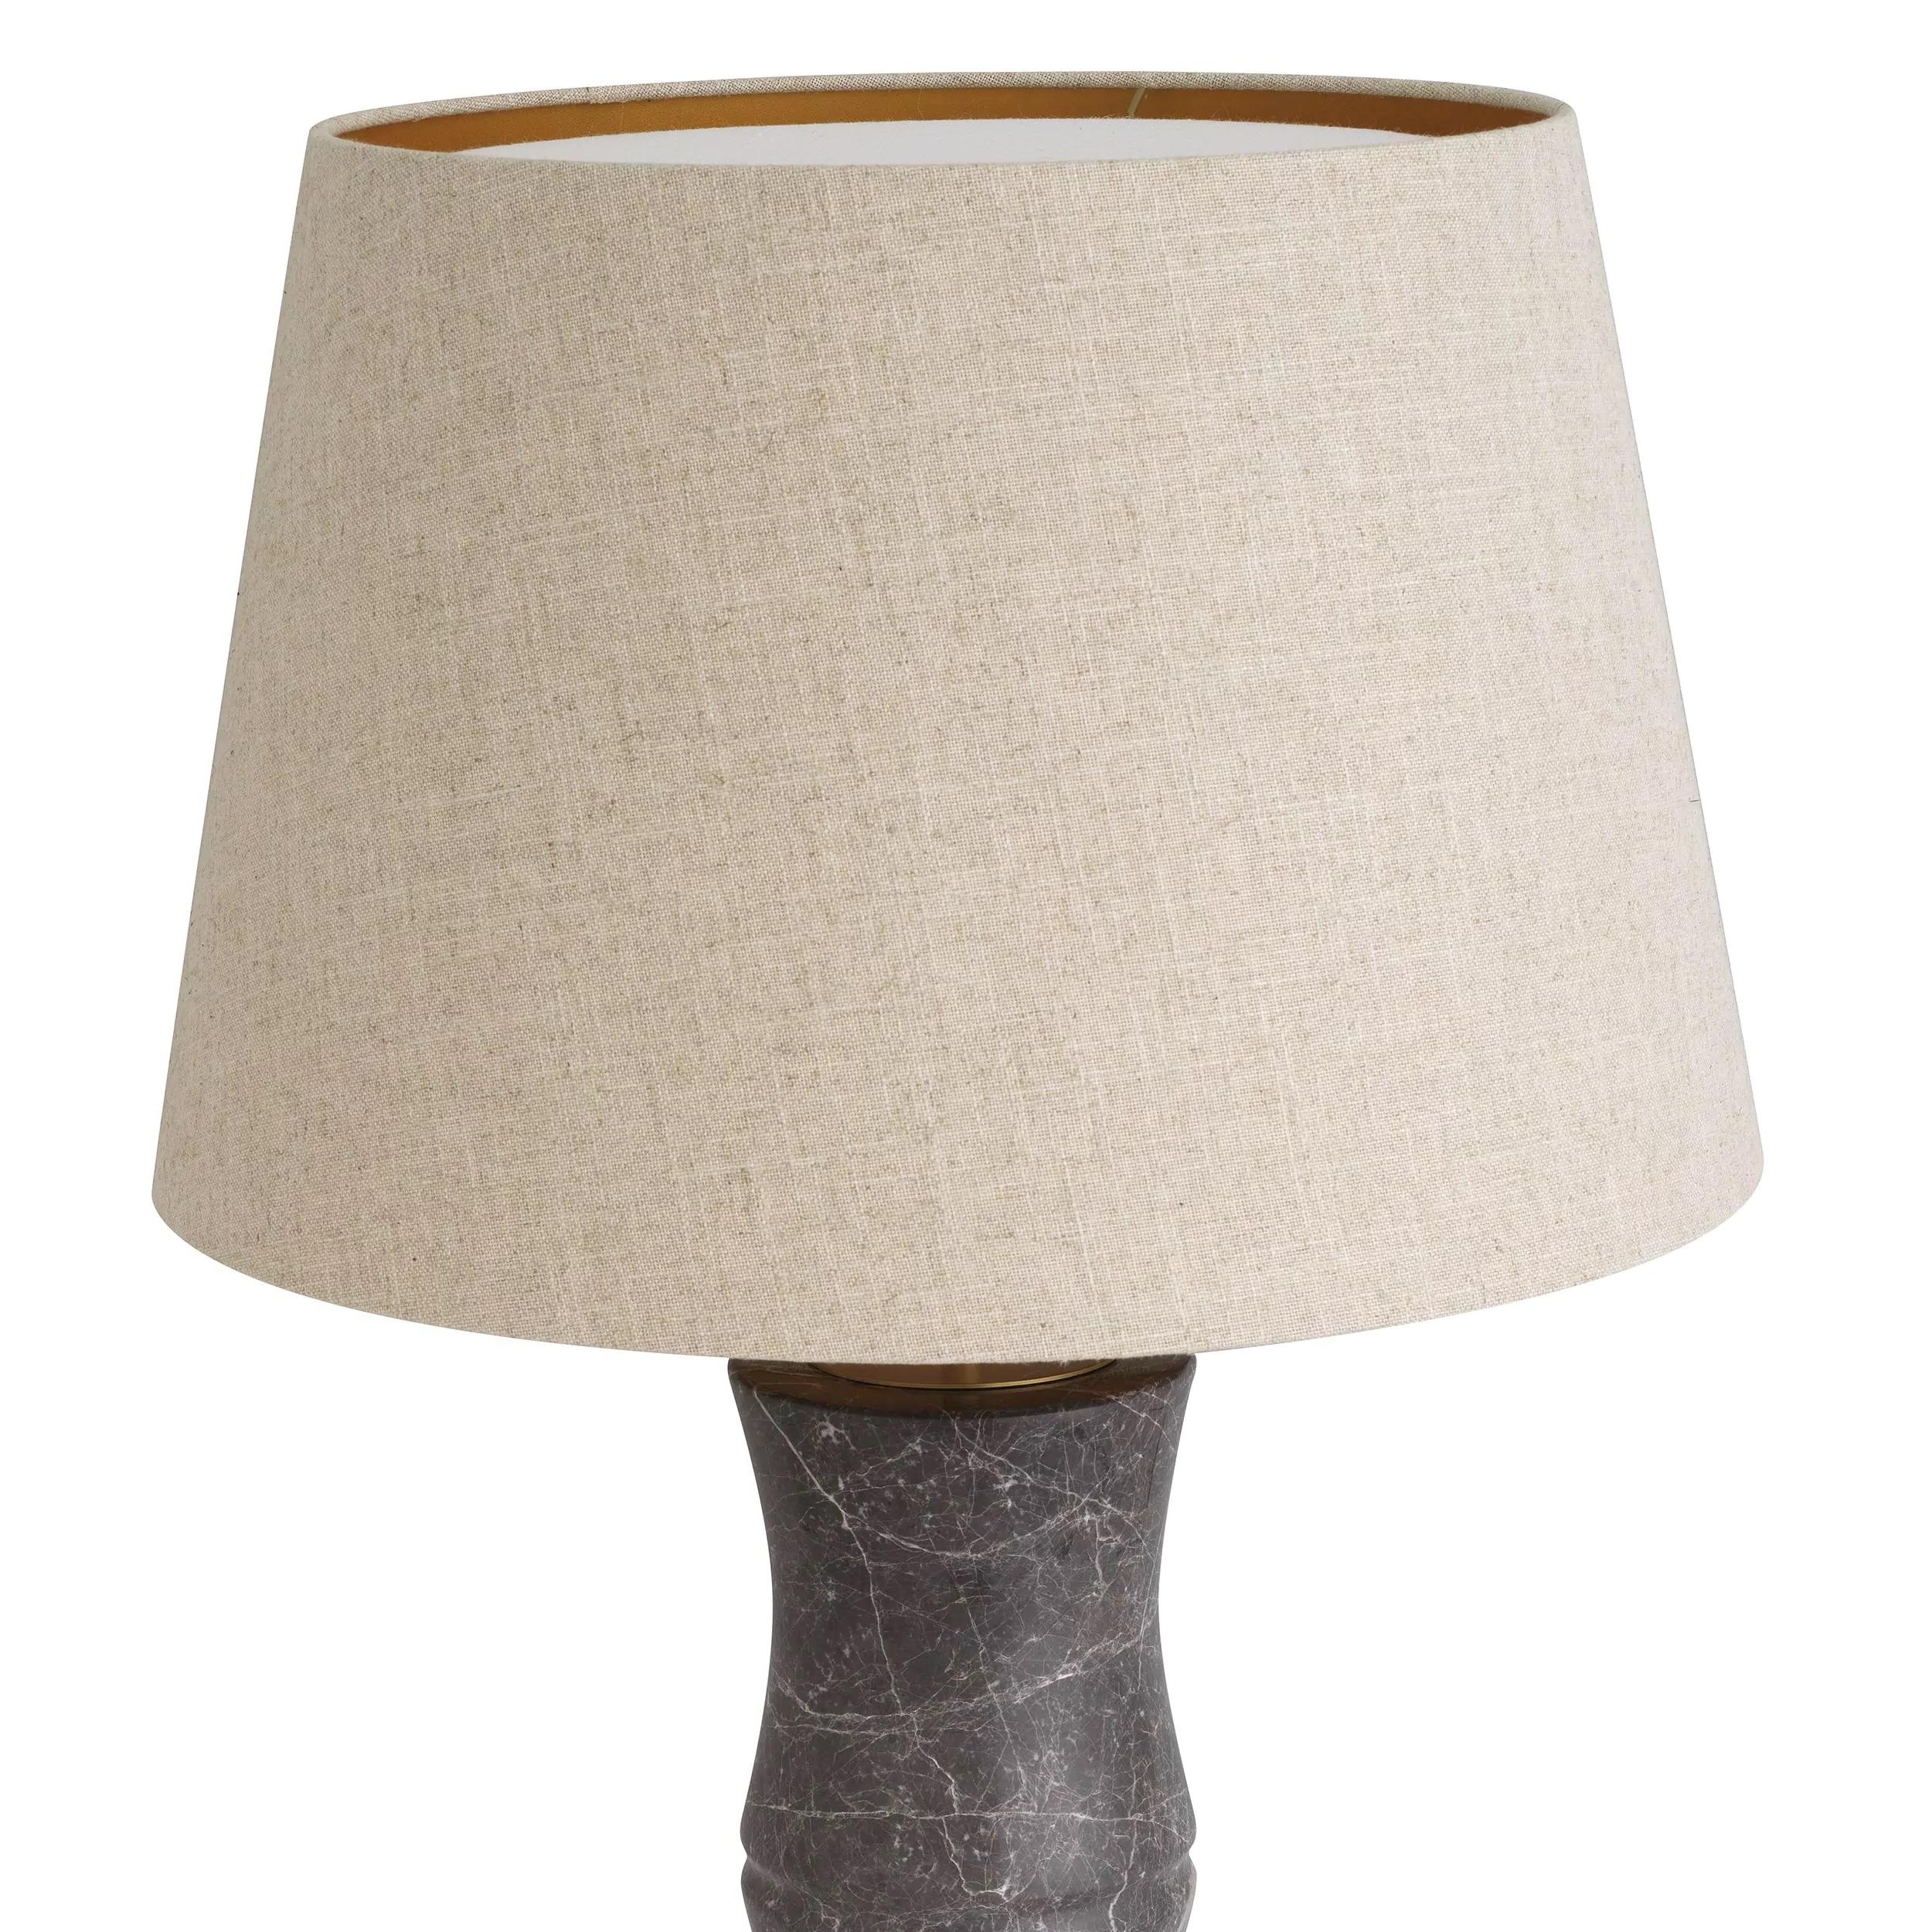 Marble and Brass Large Table Lamp composed of a grey marble sculpted base bamboo effect brass finishes metal adorned with a beige fabric shade. 1 E27 light bulb required.